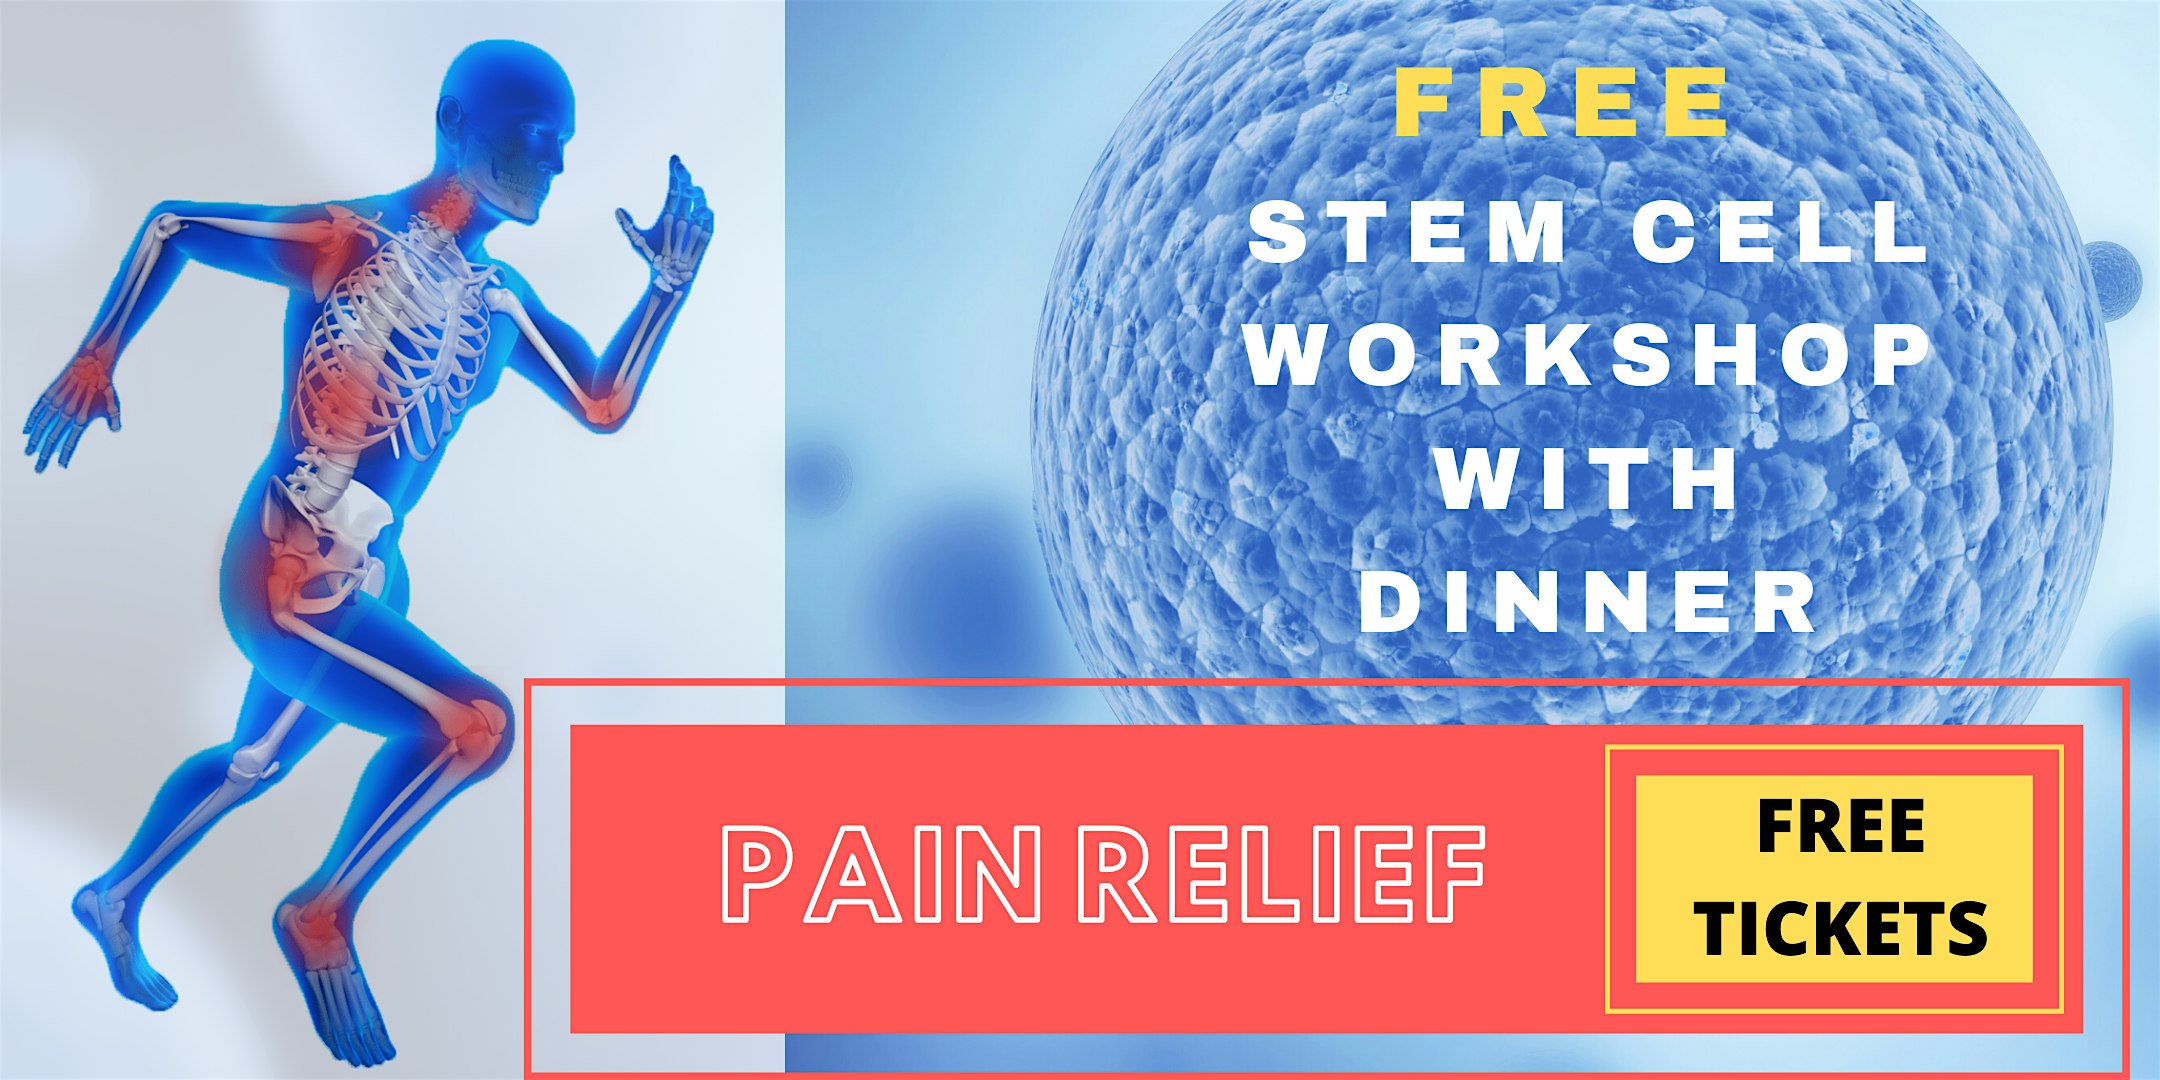 FREE Stem Cell Workshop with Dinner